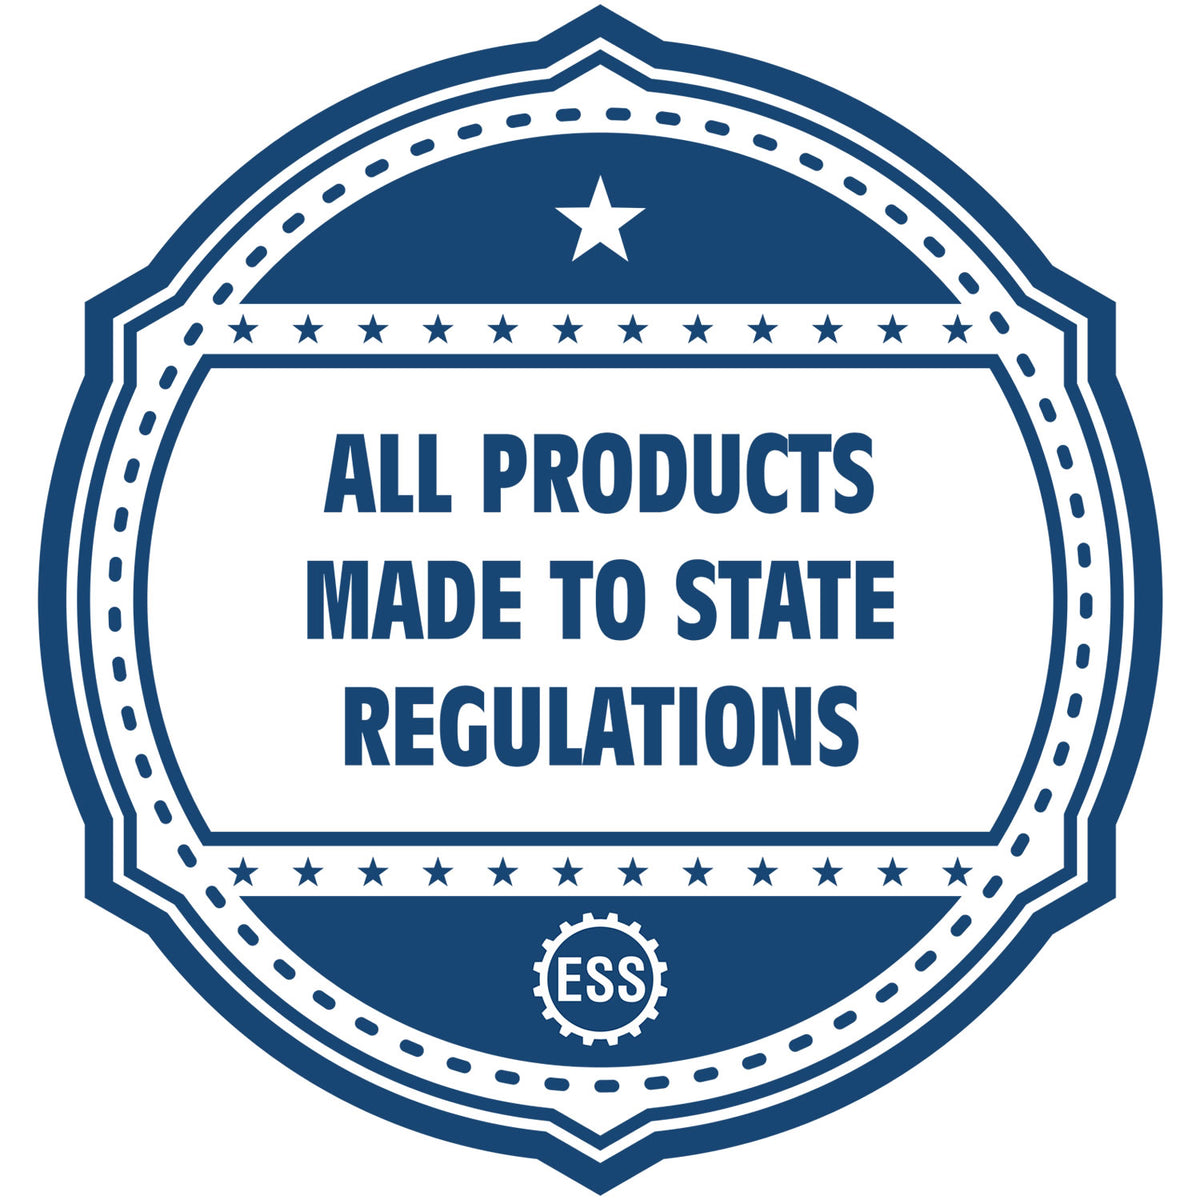 A blue icon or badge for the Gift Utah Architect Seal showing that this product is made in compliance with state regulations.